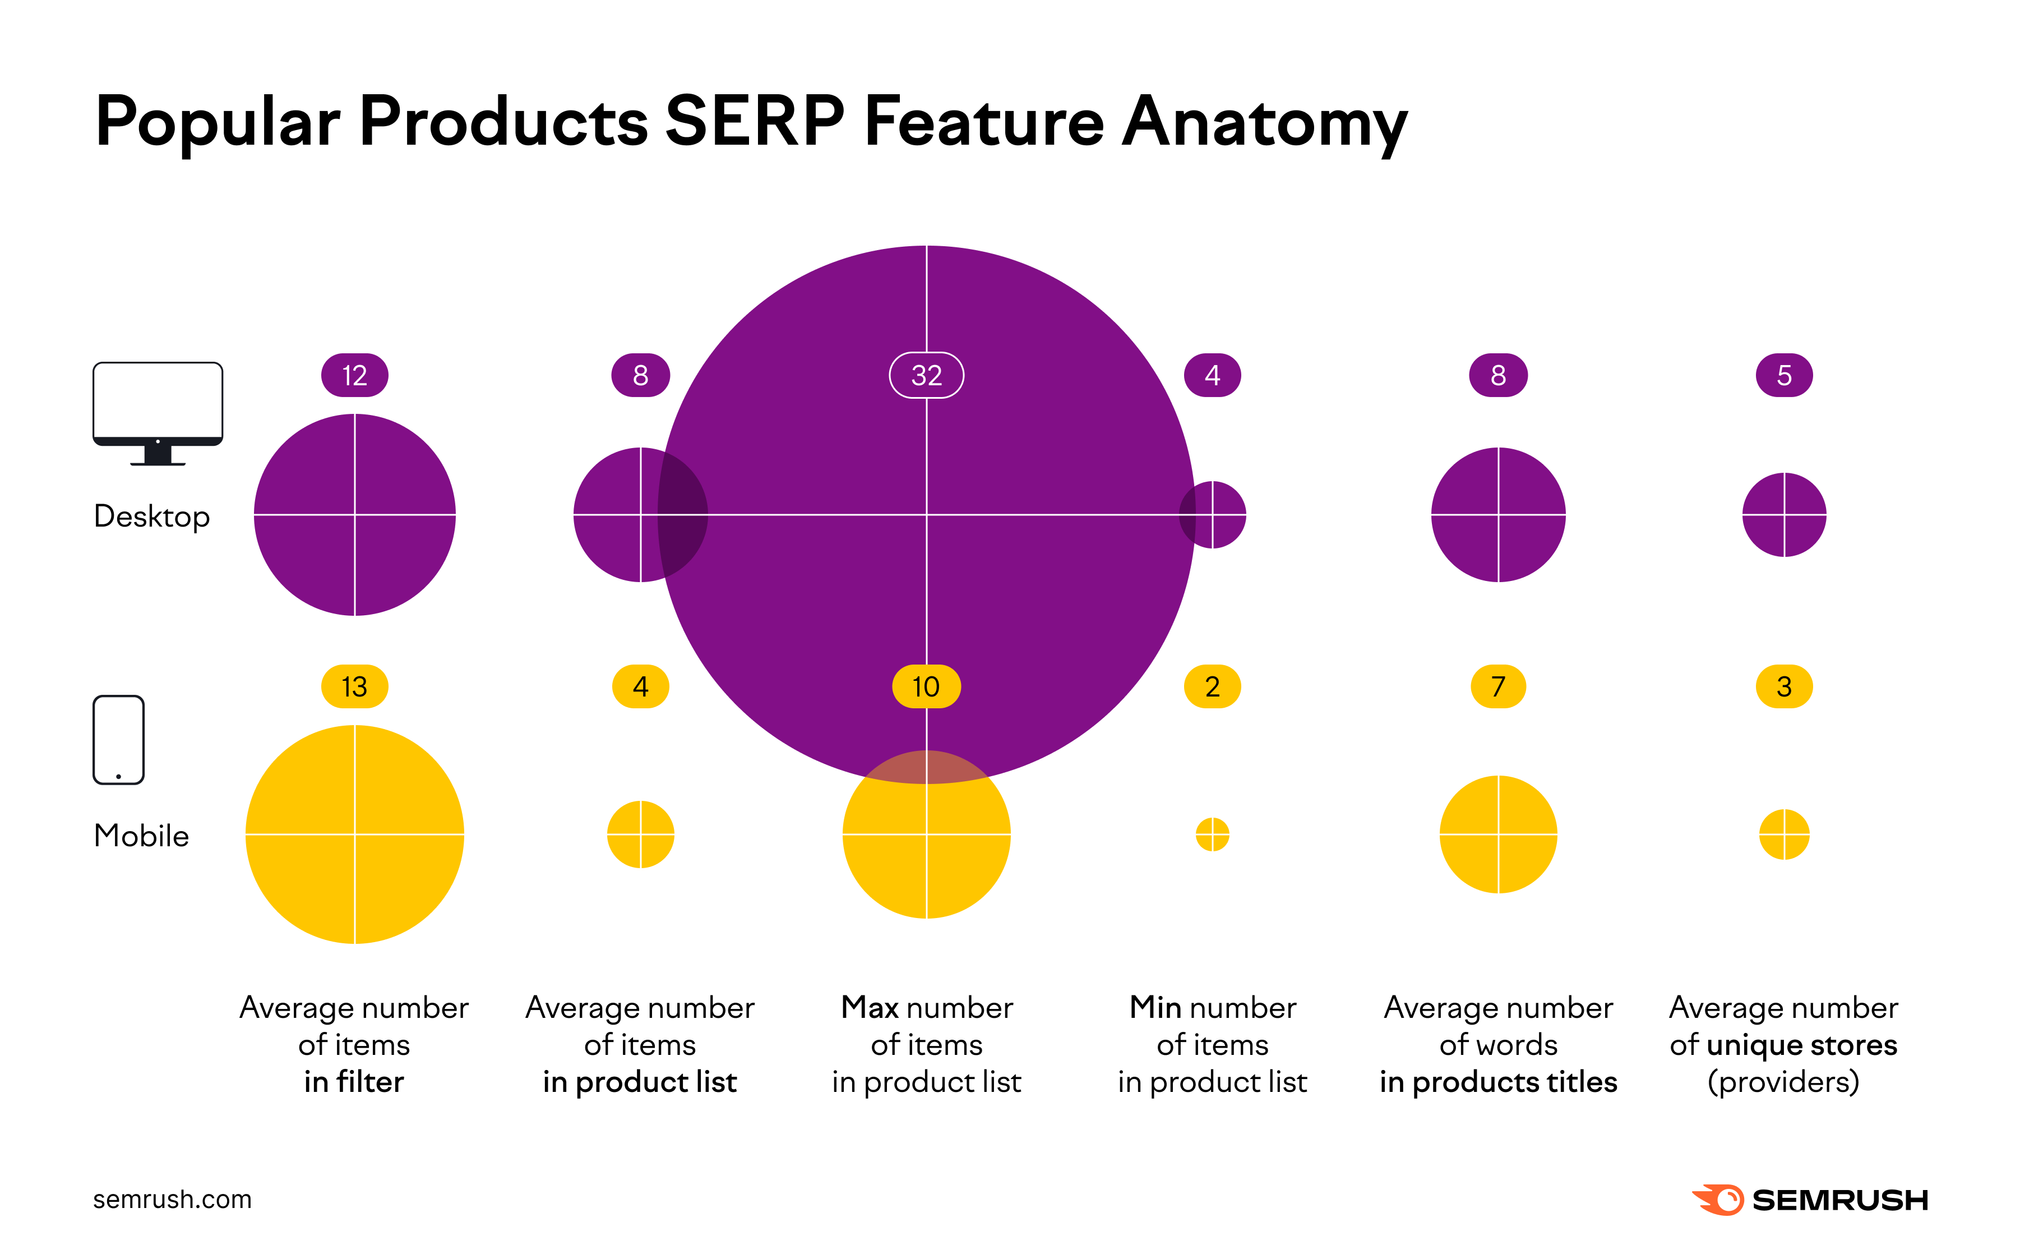 A chart displaying the Popular Products SERP Feature anatomy for desktop and mobile.